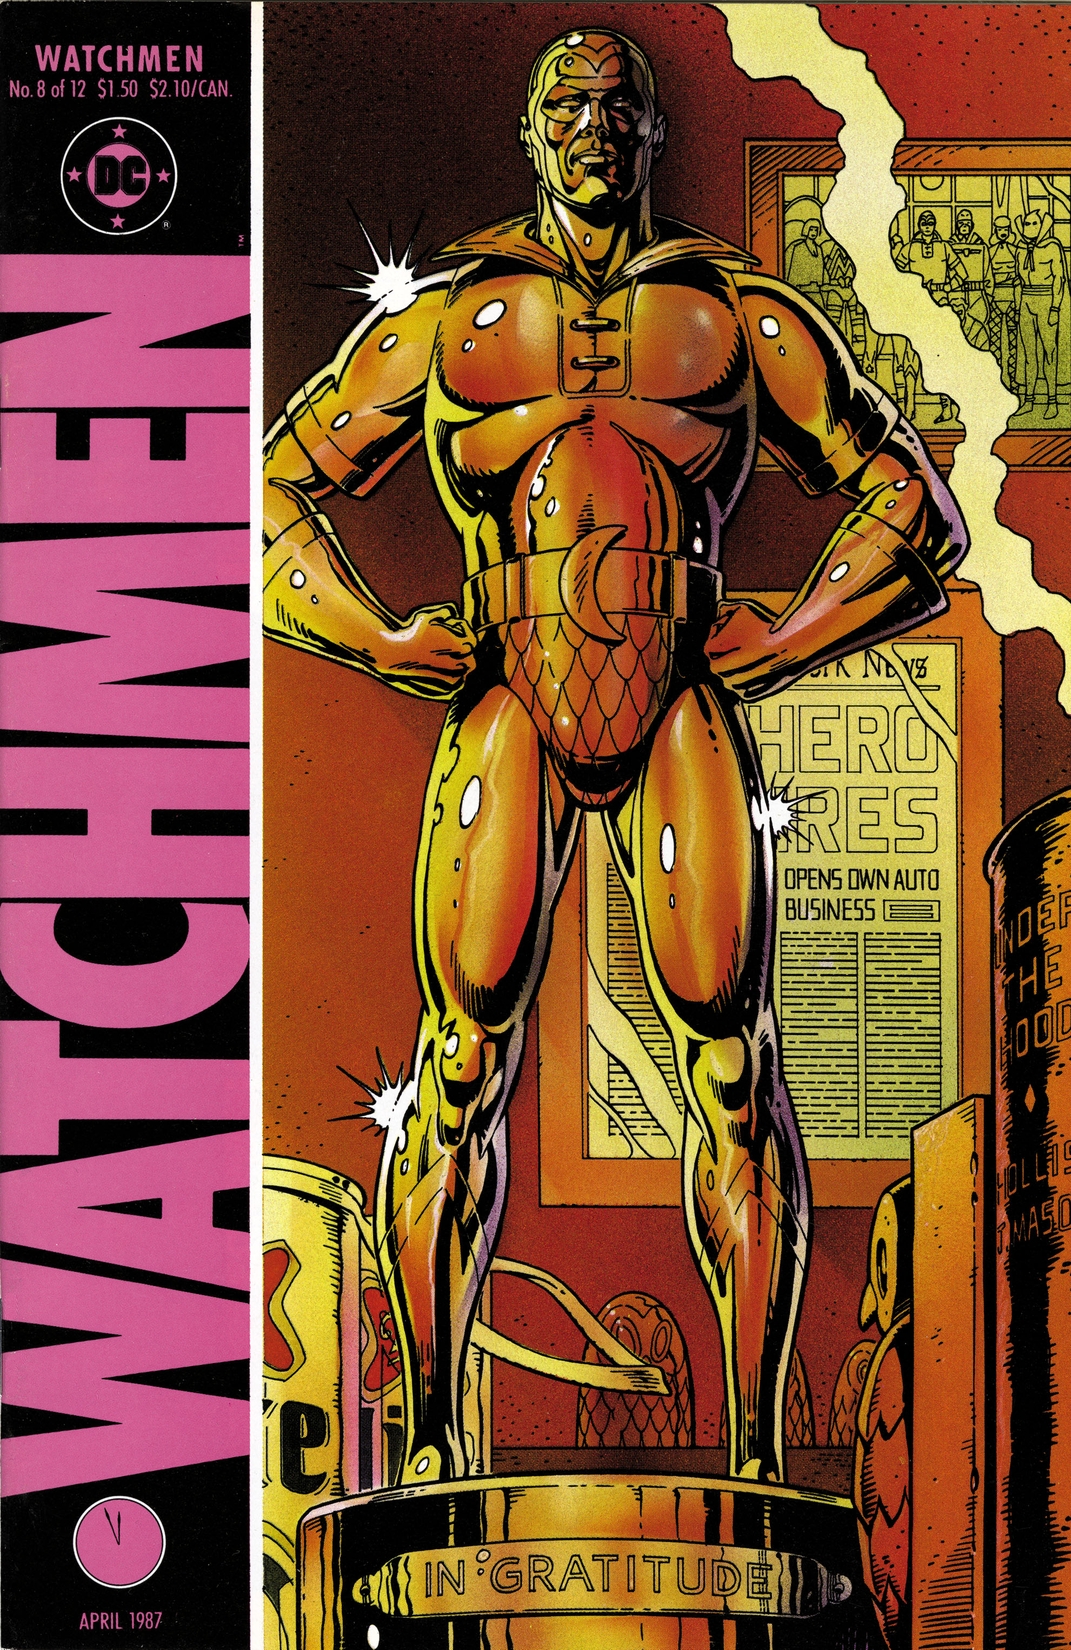 Watchmen #8 preview images